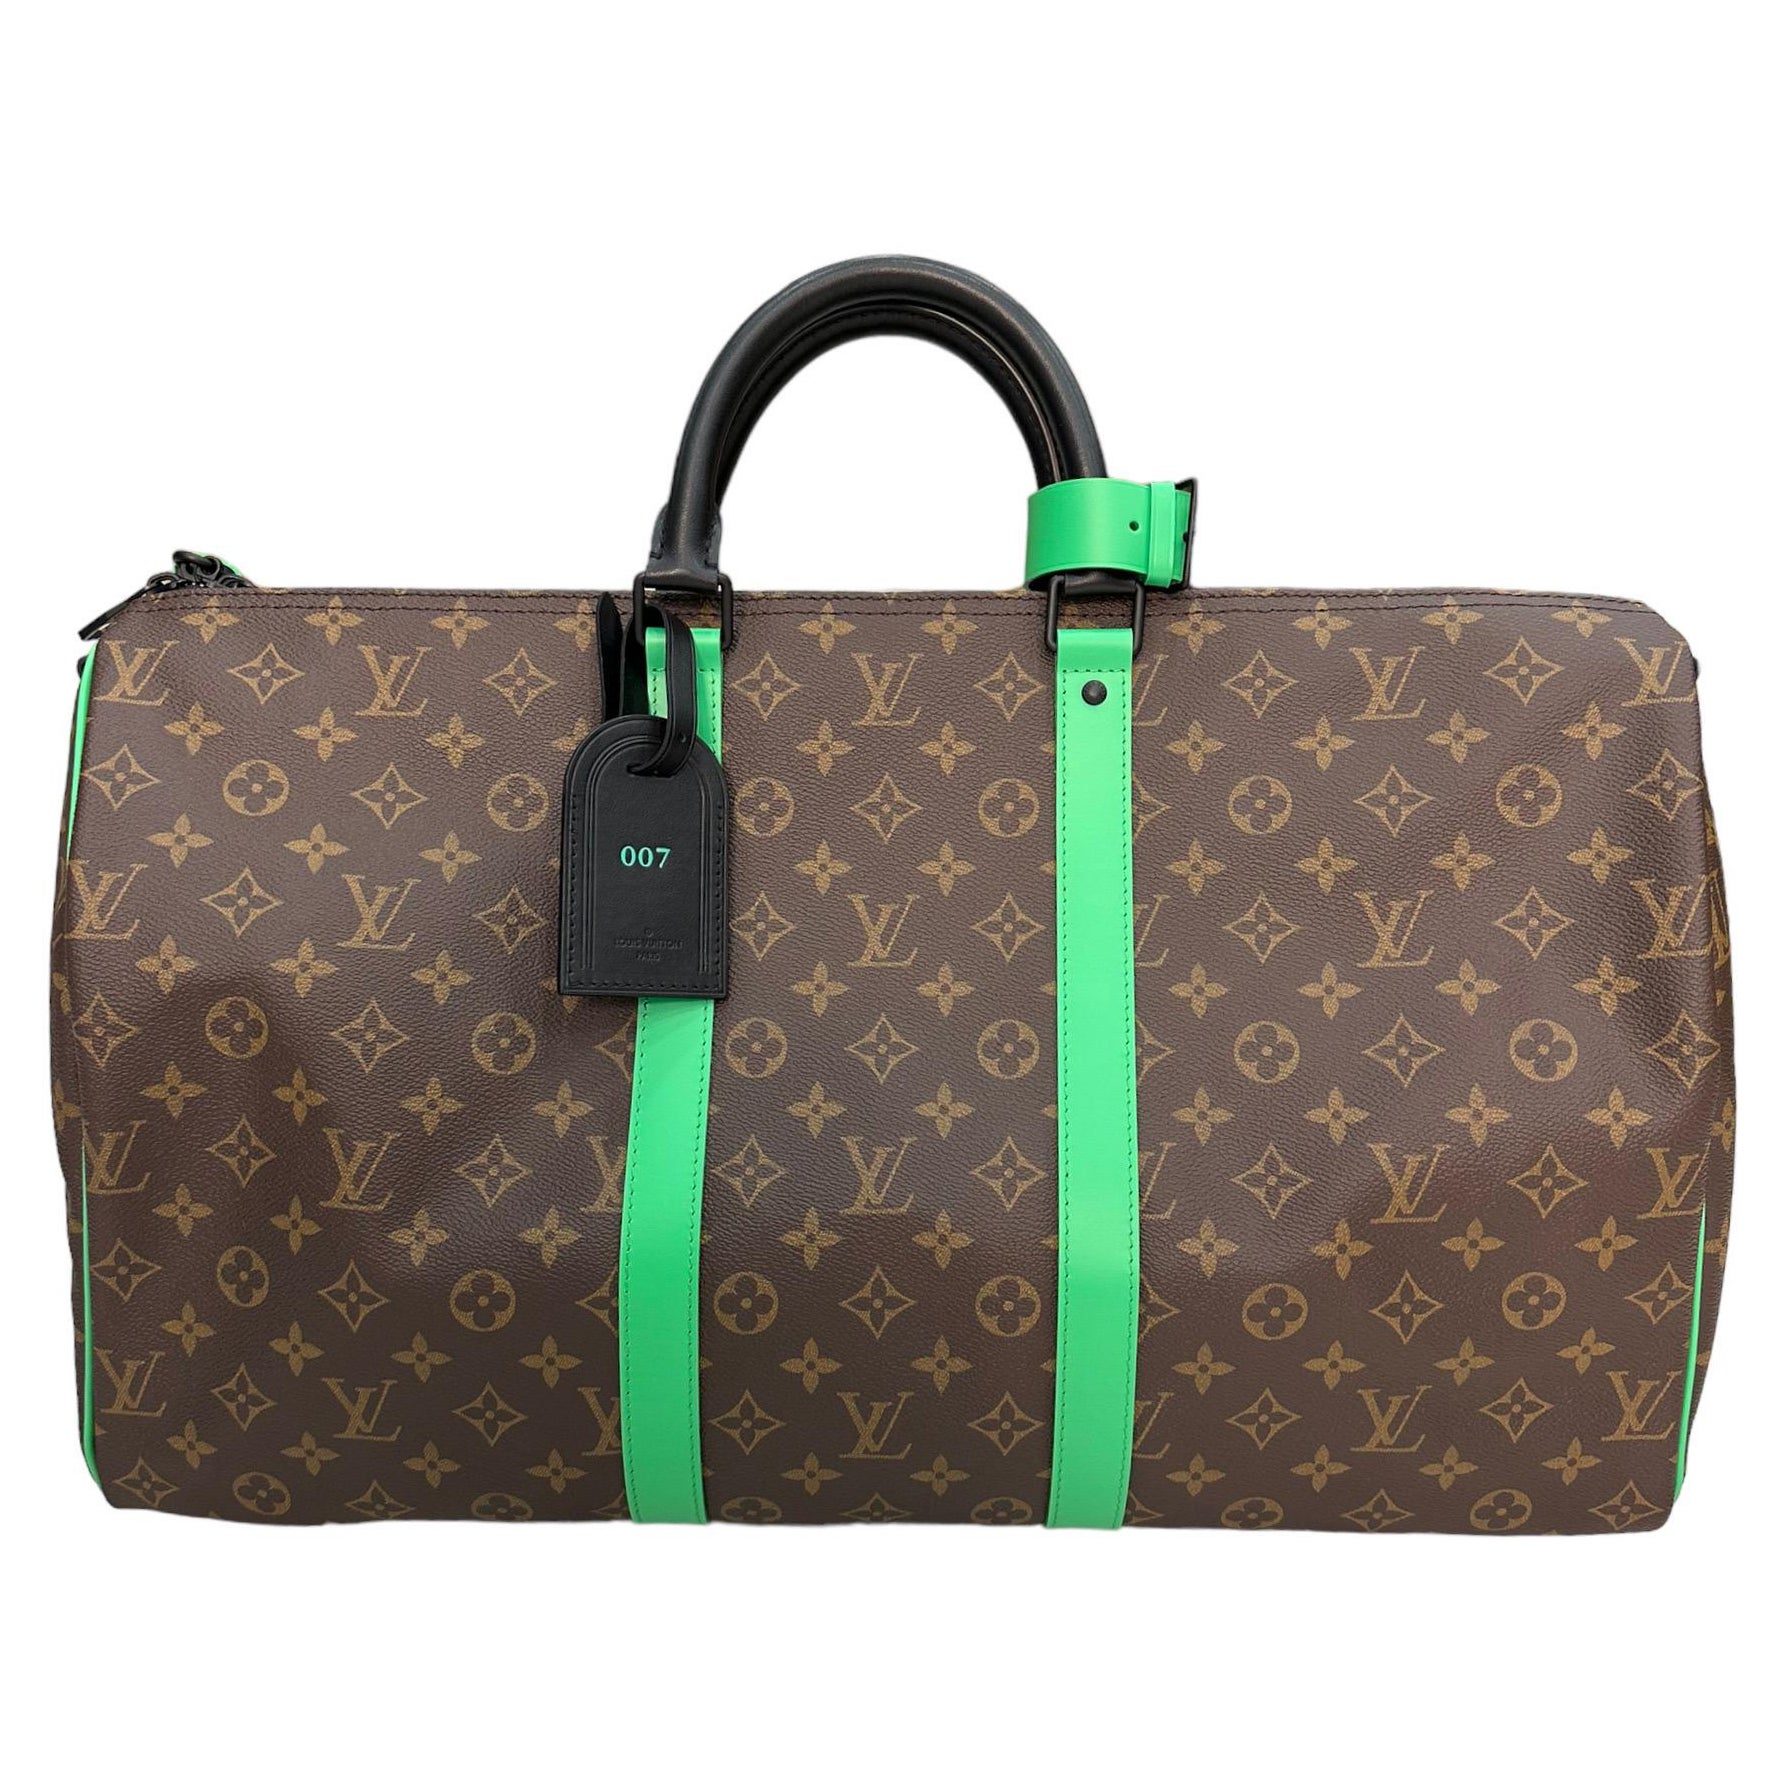 Louis Vuitton Keepall Bandouliere By Virgil Abloh In Green And Blue Leather